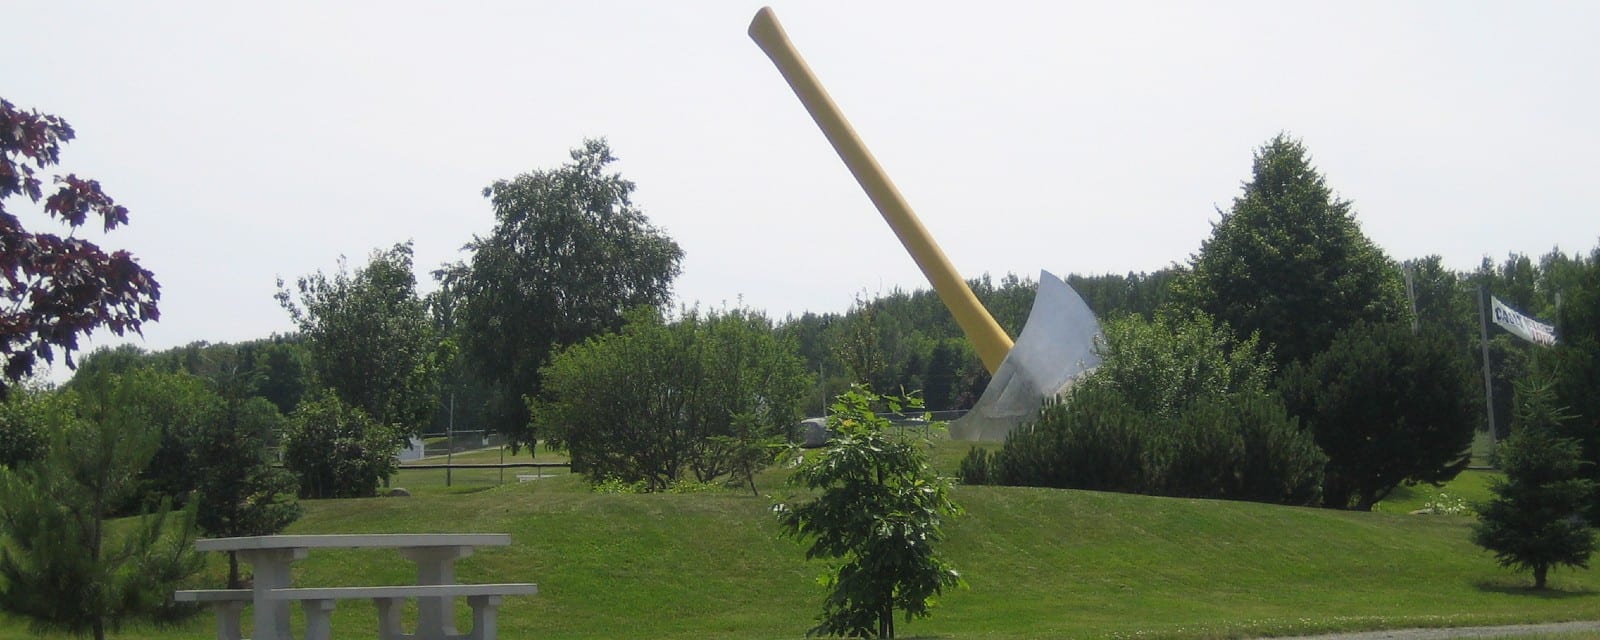 largest axe in park